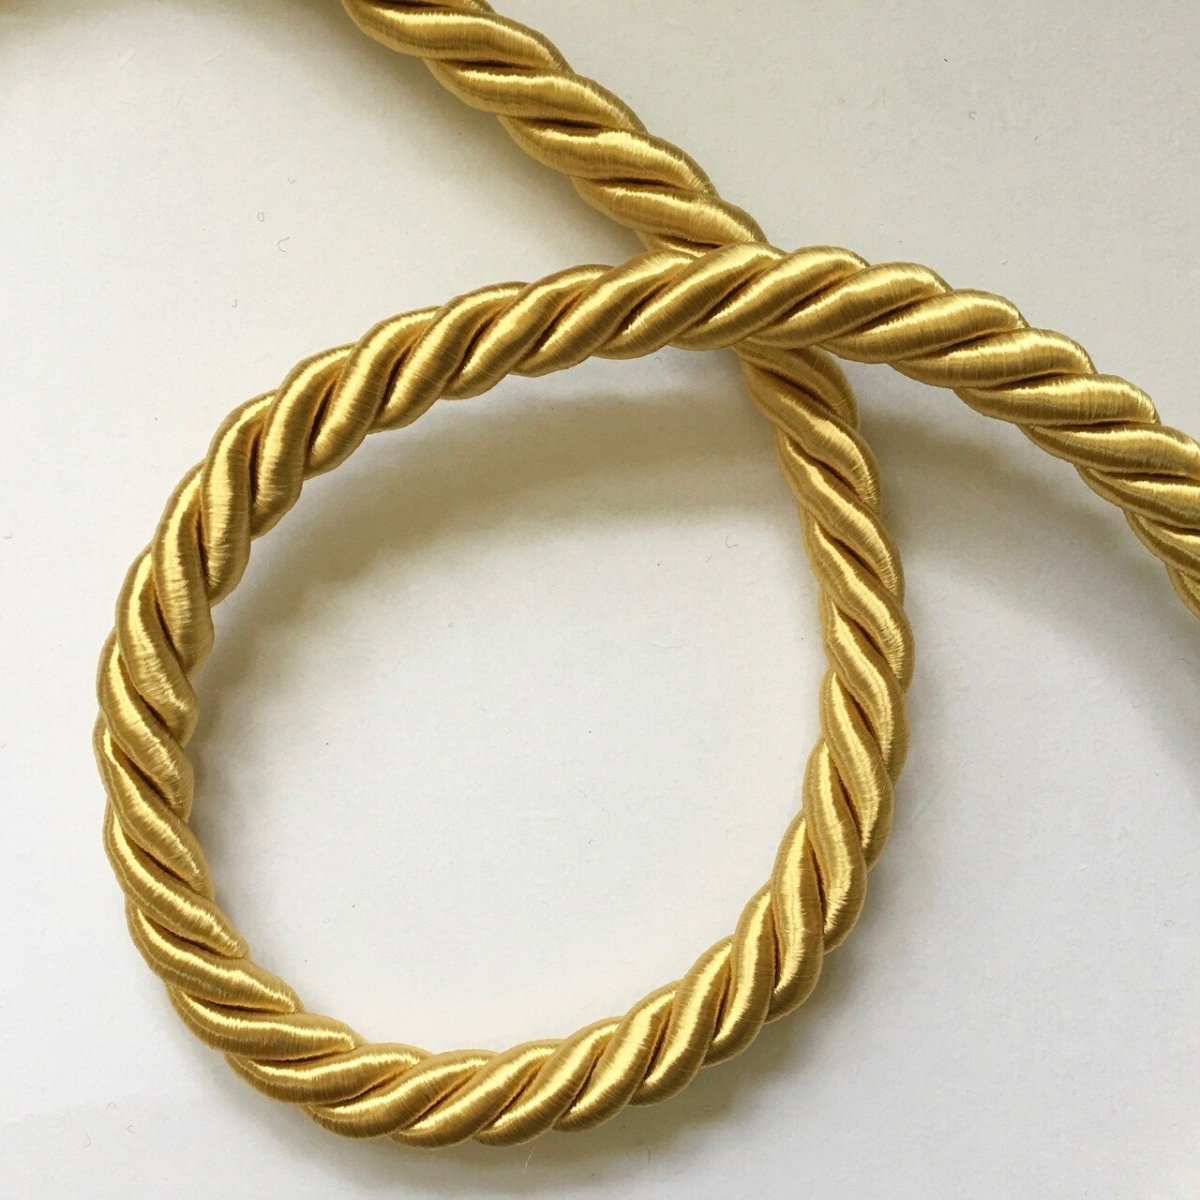 Gold Twisted Cord Trim  1/2 Decorative Cording BTY